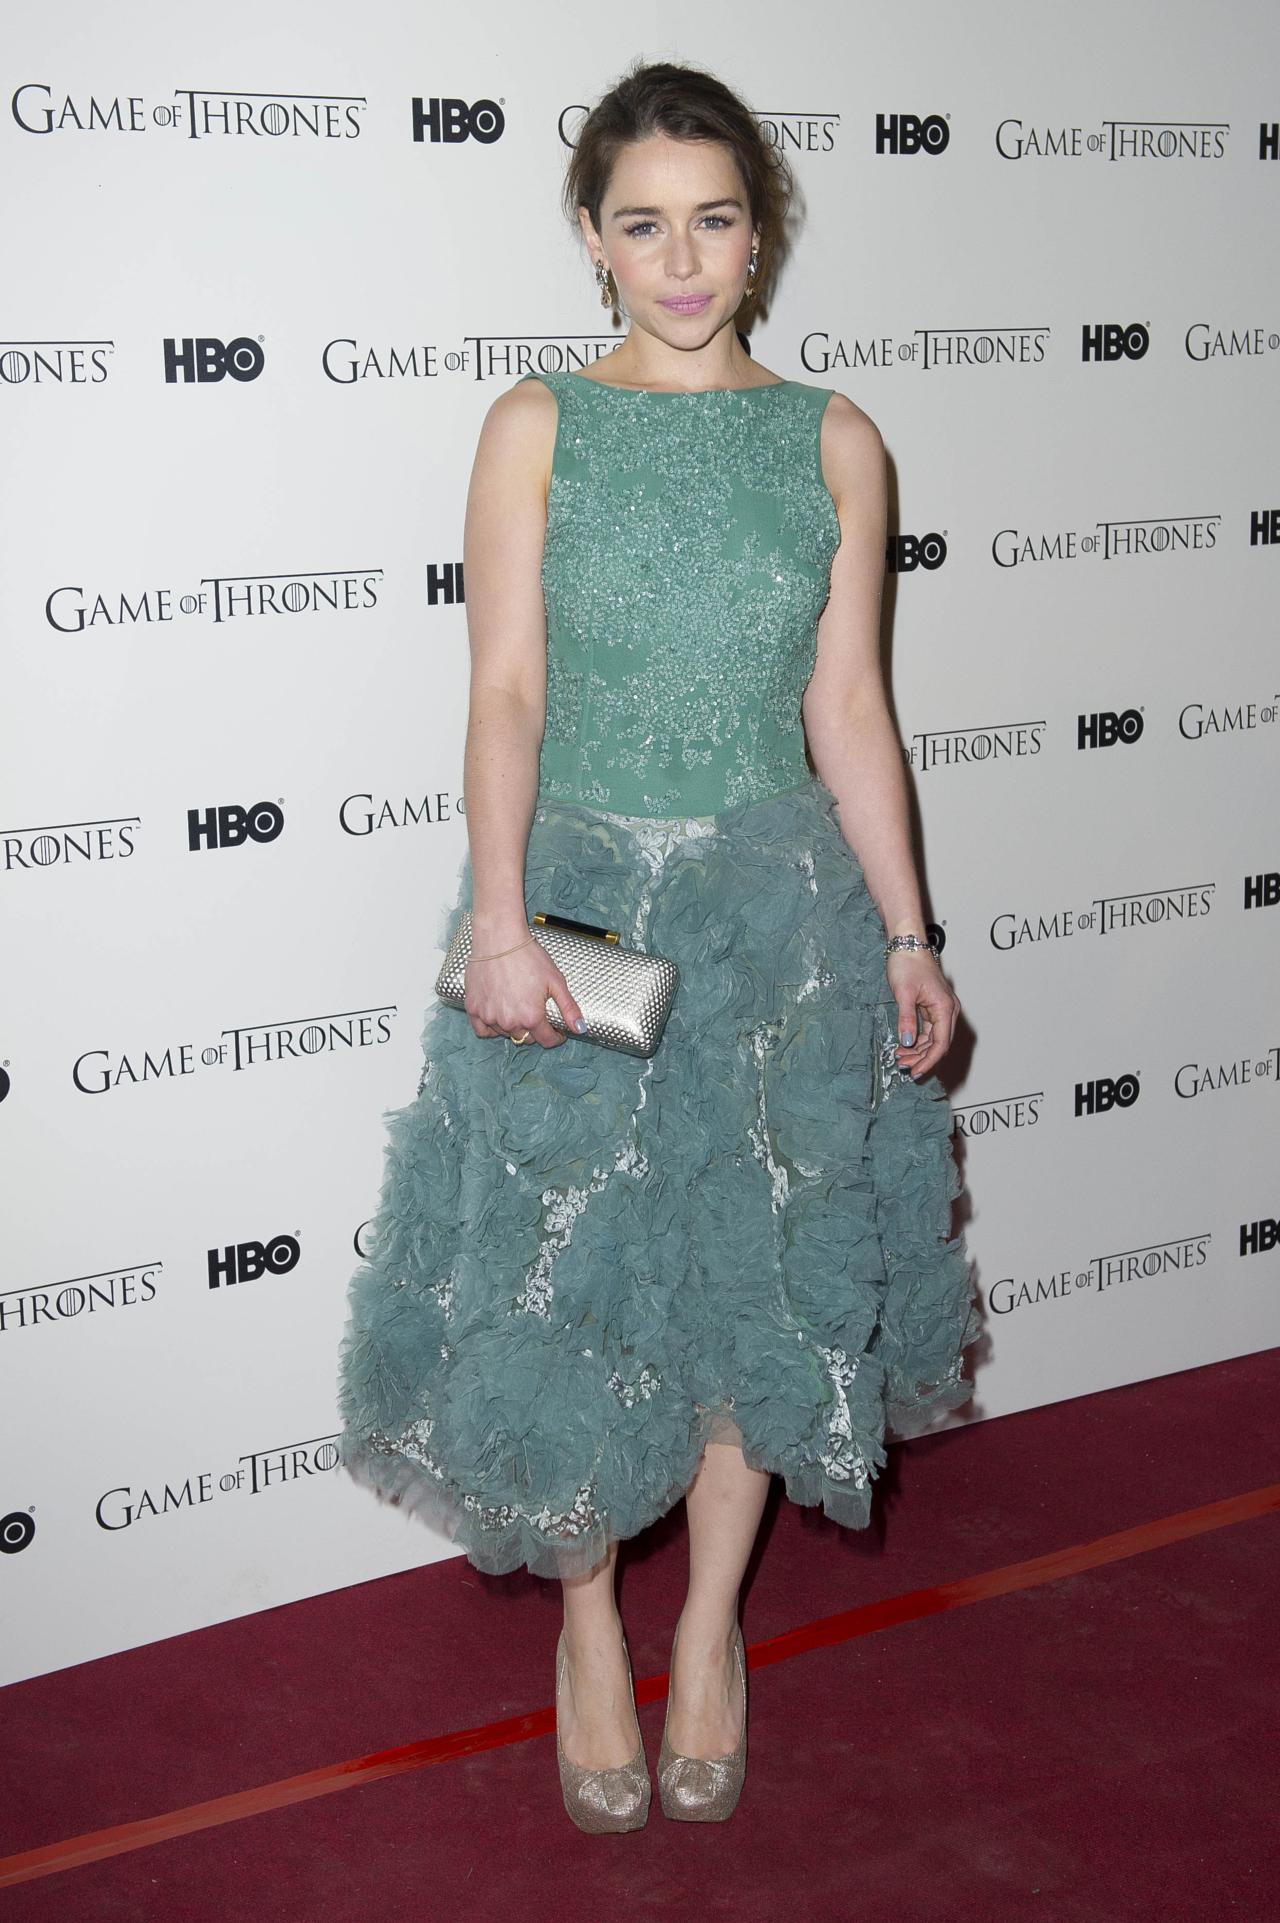 British actress Emilia Clarke arrives for the Game Of Thrones launch event at a central London venue, Wednesday, Feb. 29, 2012. (AP Photo/Jonathan Short)